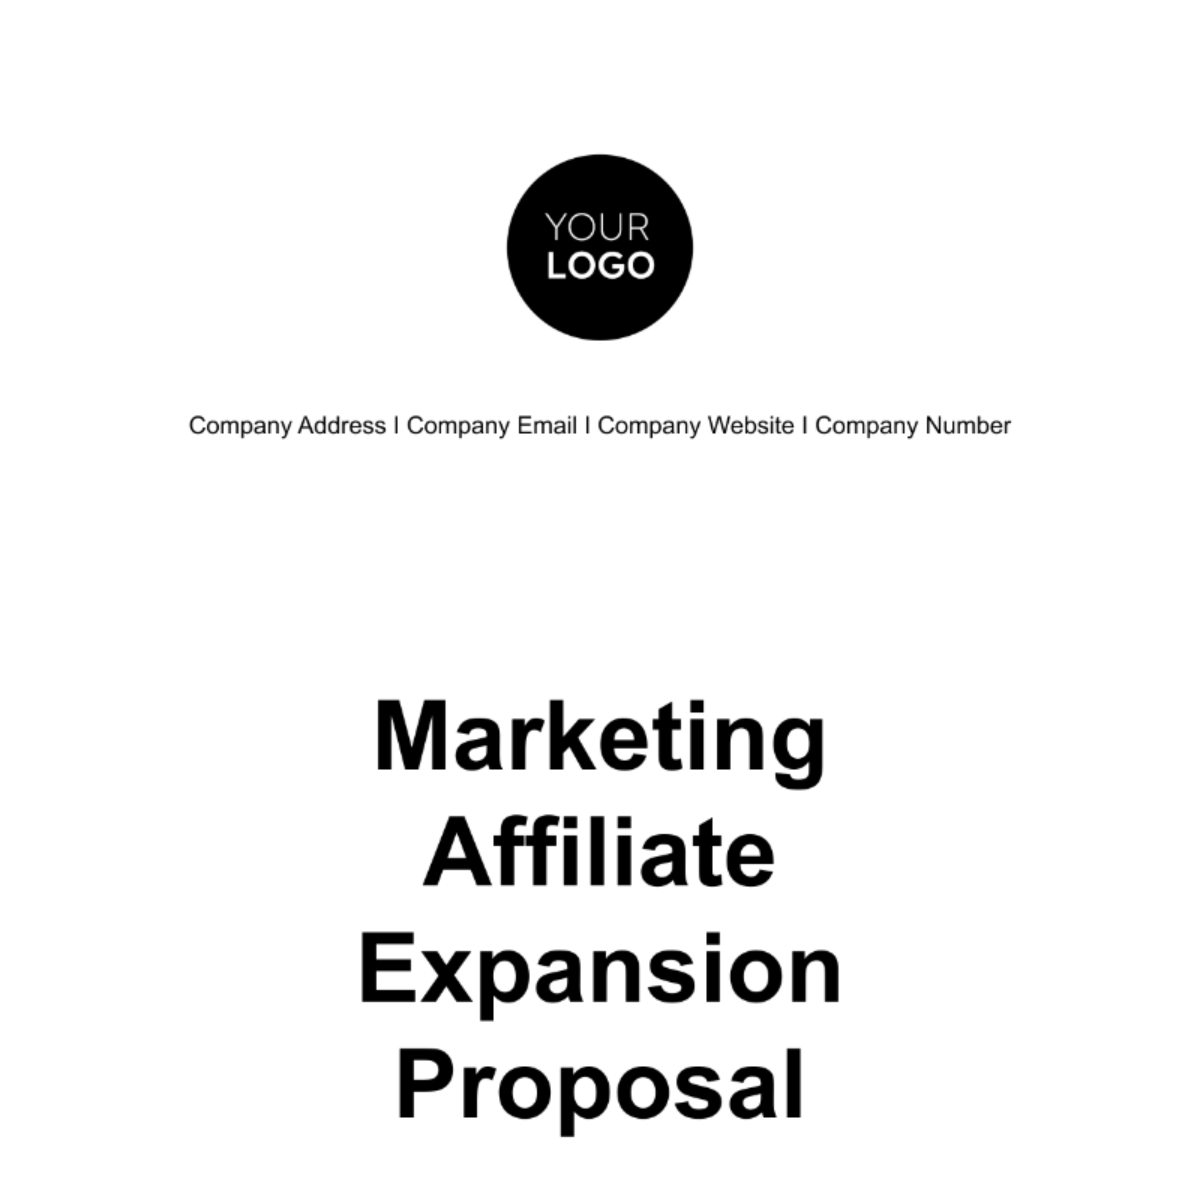 Marketing Affiliate Expansion Proposal Template